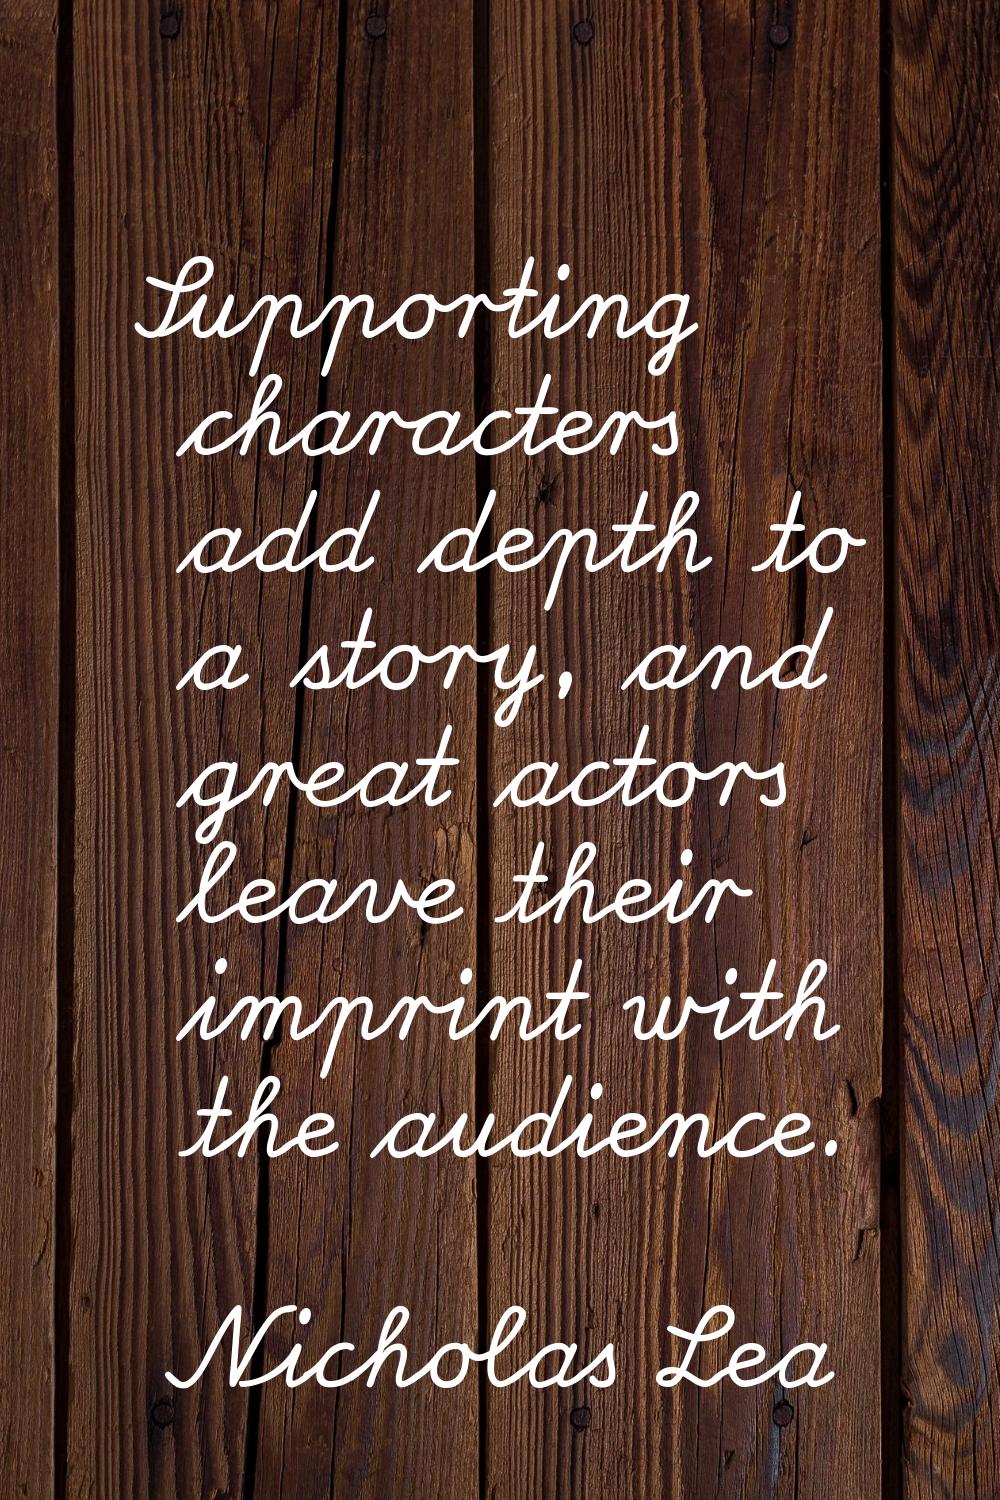 Supporting characters add depth to a story, and great actors leave their imprint with the audience.